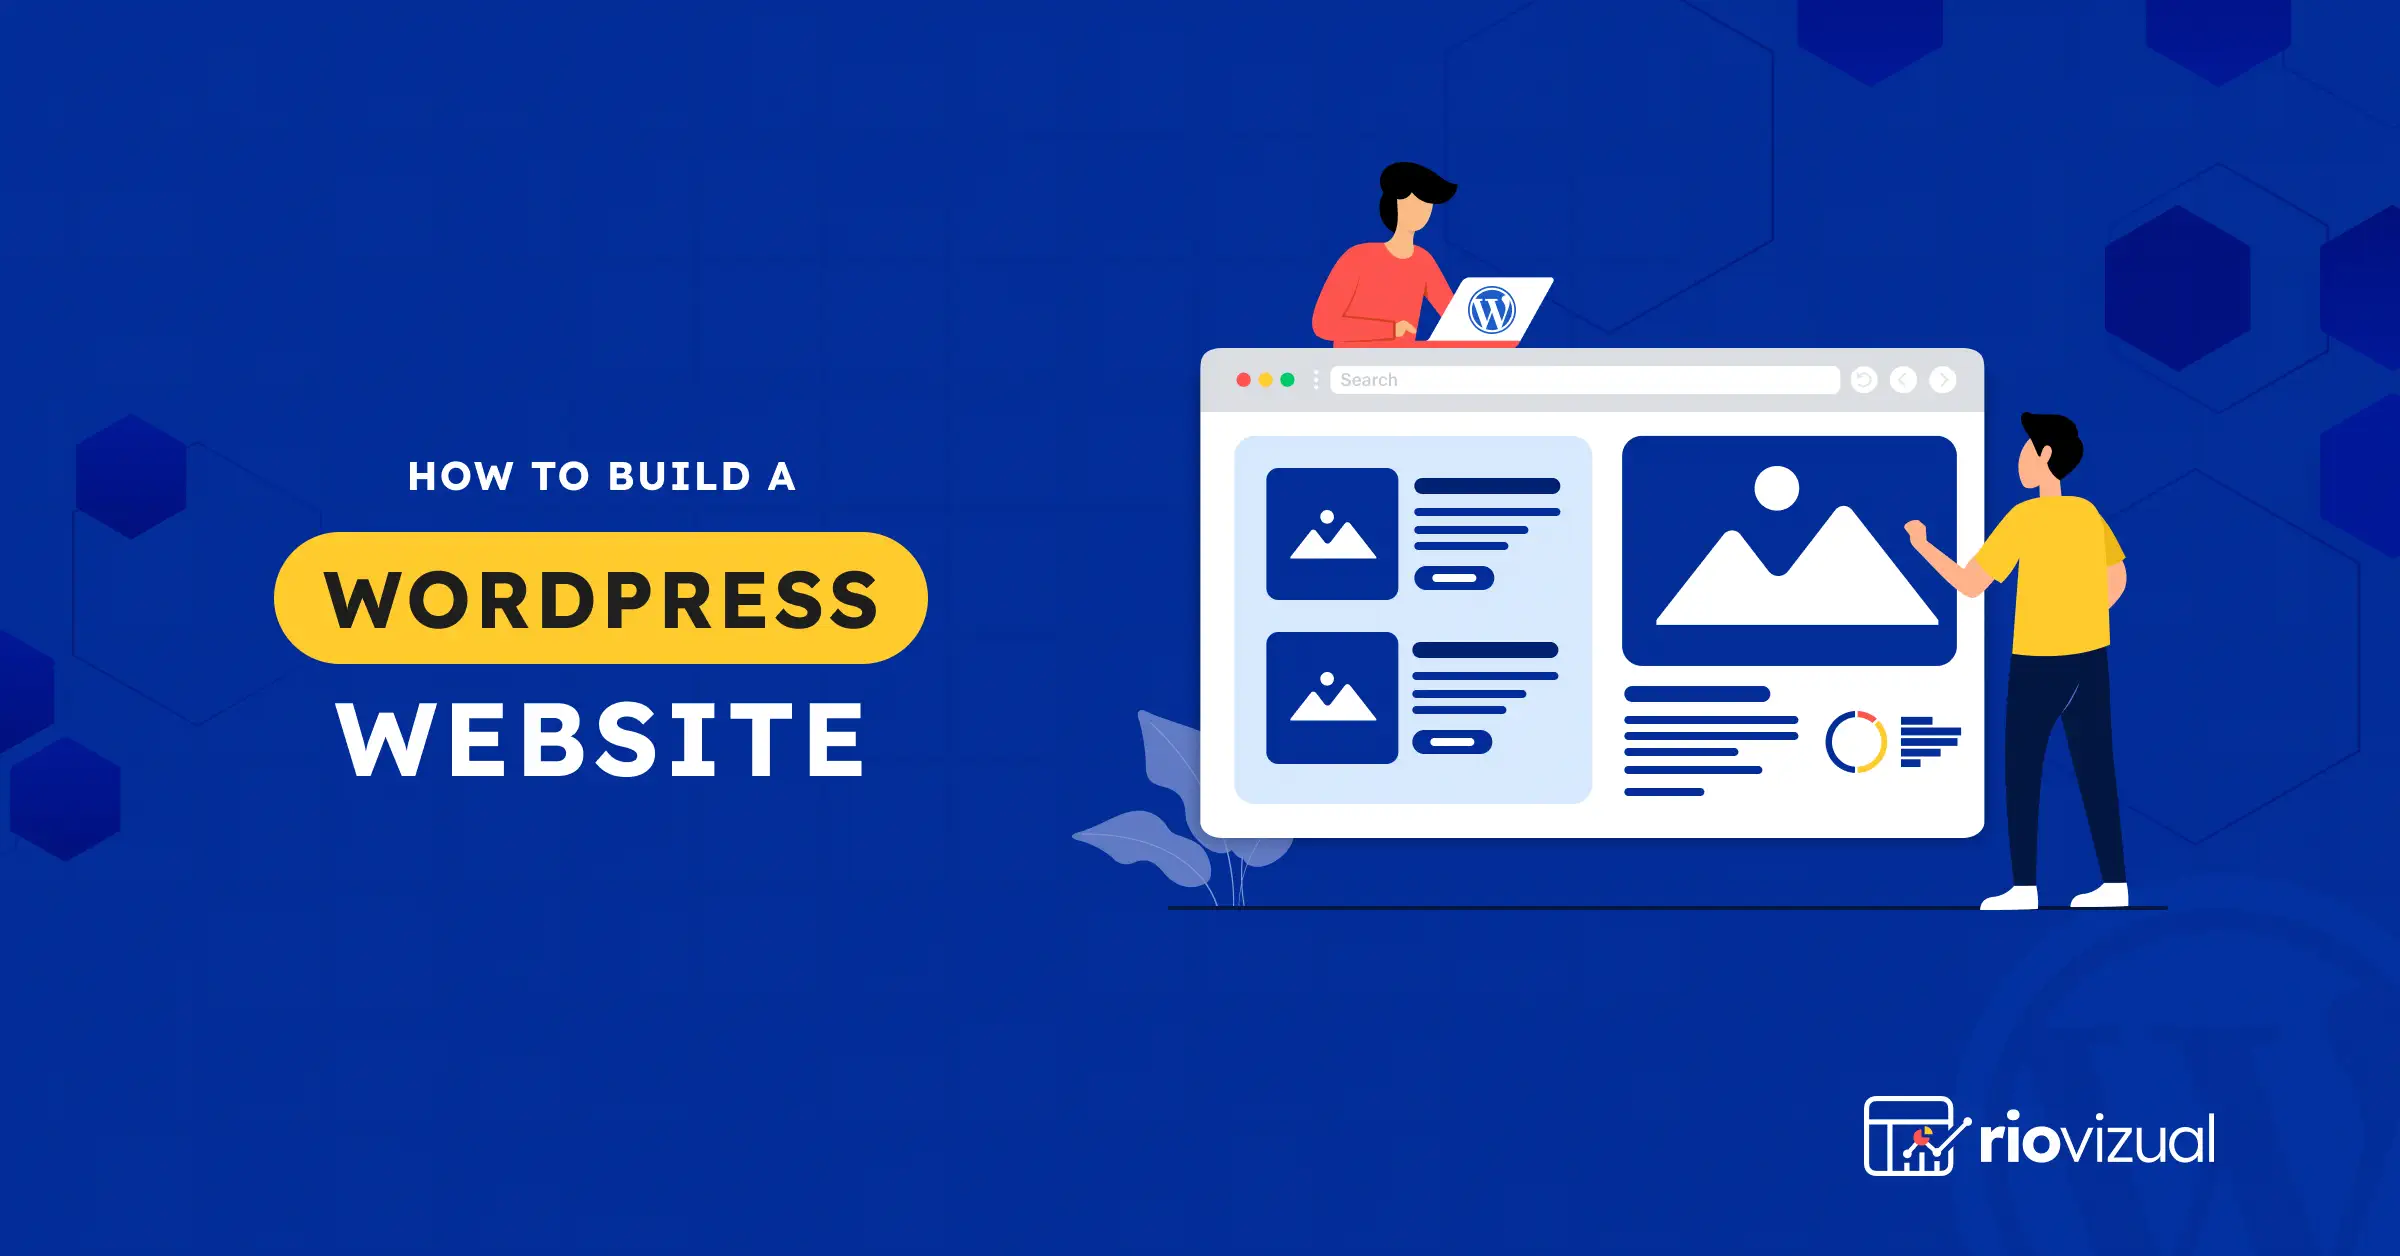 How To Build A WordPress Website From Scratch?